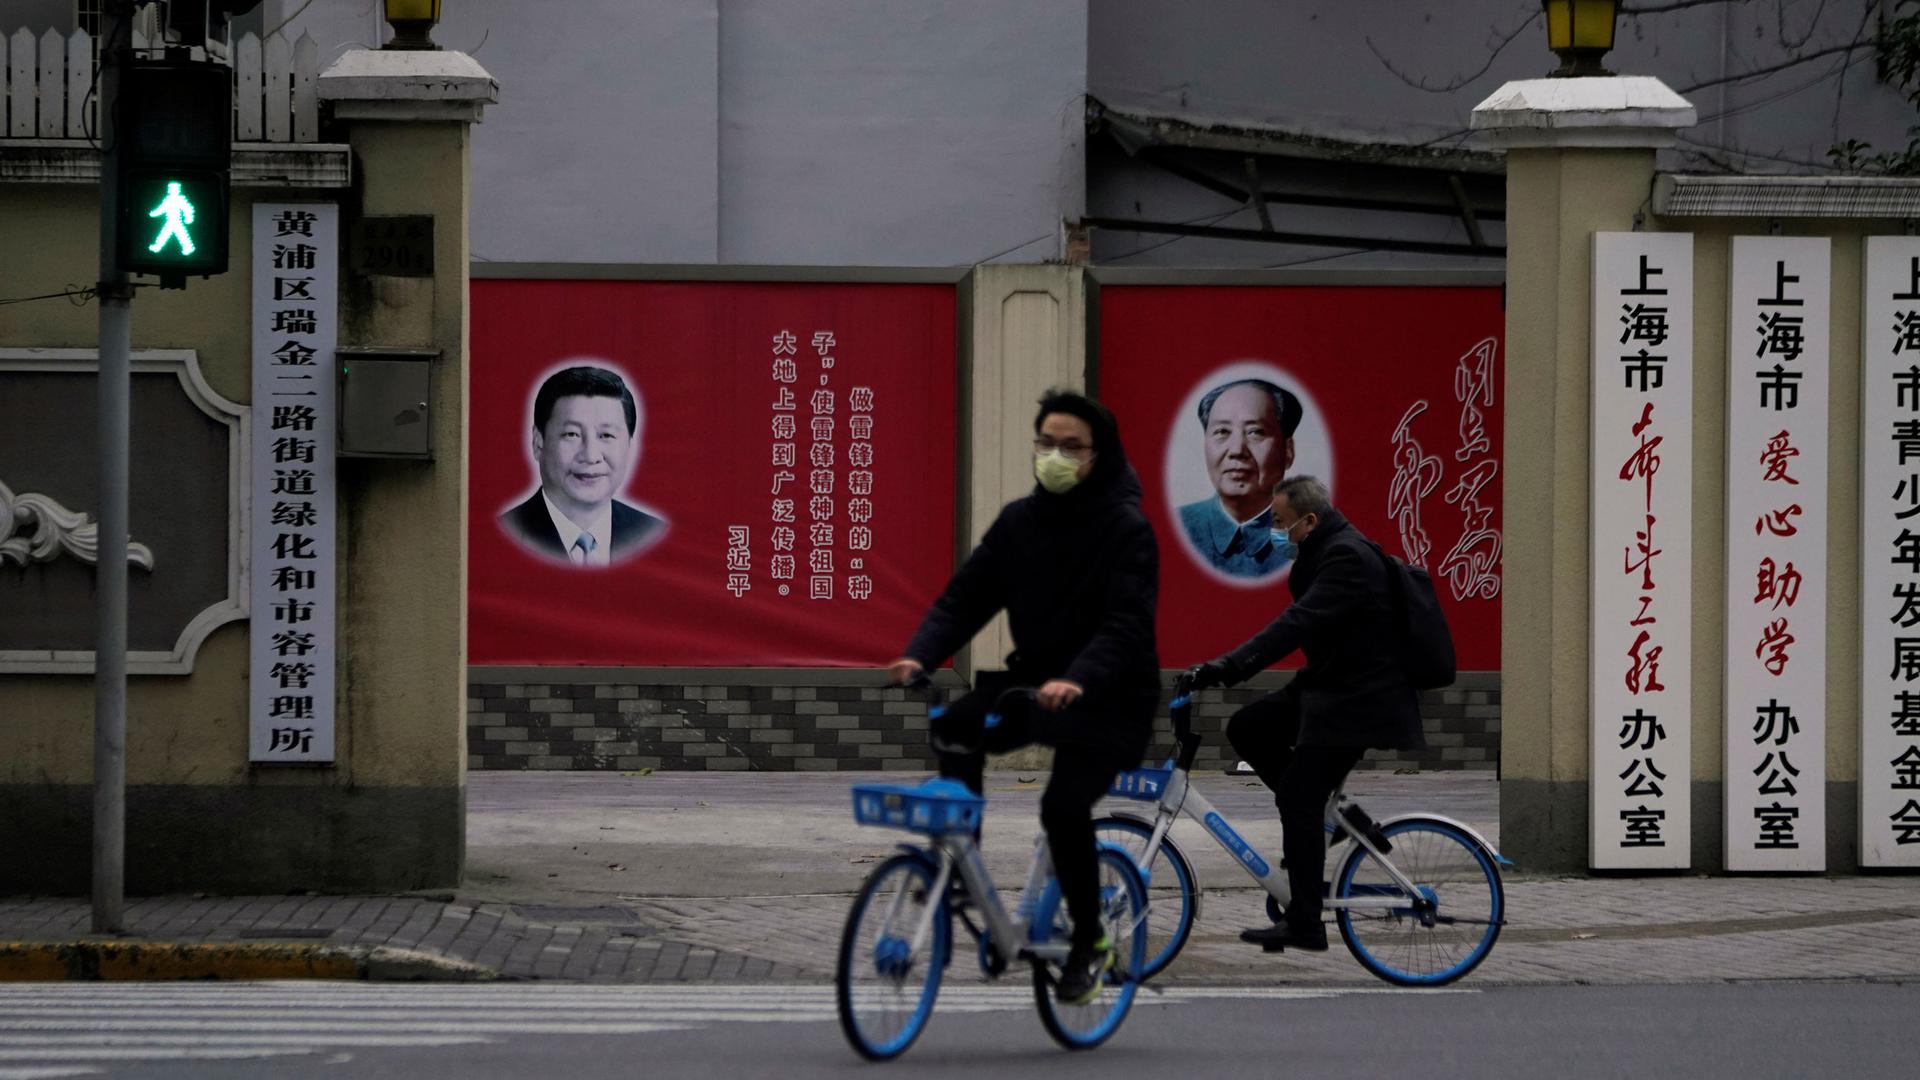 Two people riding bicycles are shown wearing face masks and passing by portraits of Chinese President Xi Jinping and late Chinese chairman Mao Zedong.